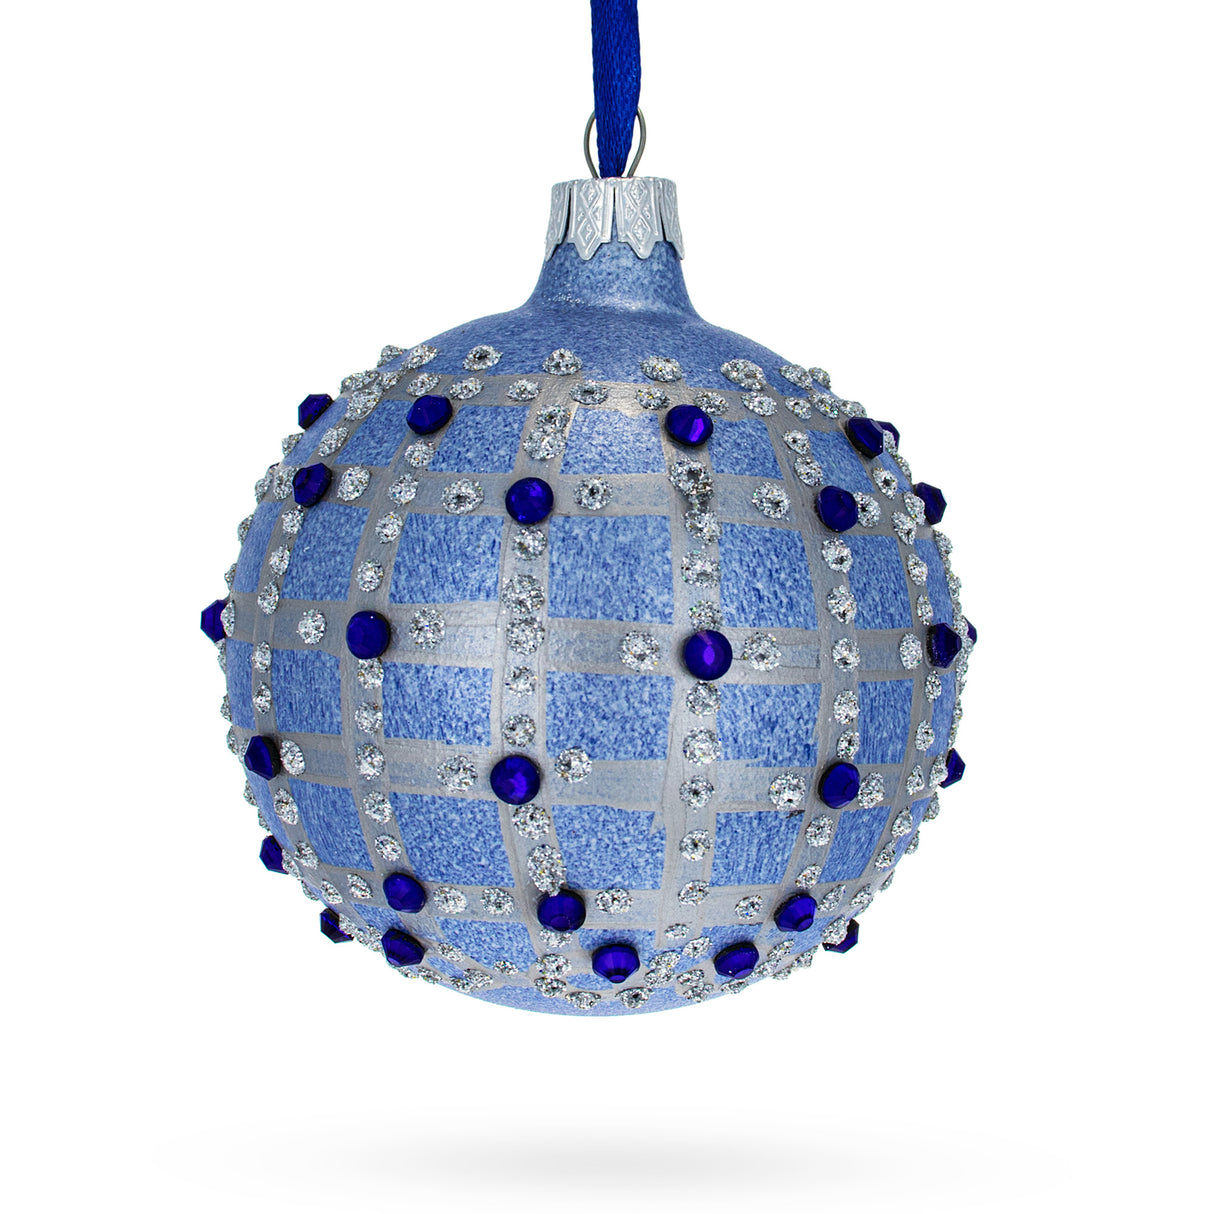 Glass Parisian Elegance: Blue Jewels and Check Pattern Necklace Design Glass Ball Christmas Ornament 3.25 Inches in Blue color Round